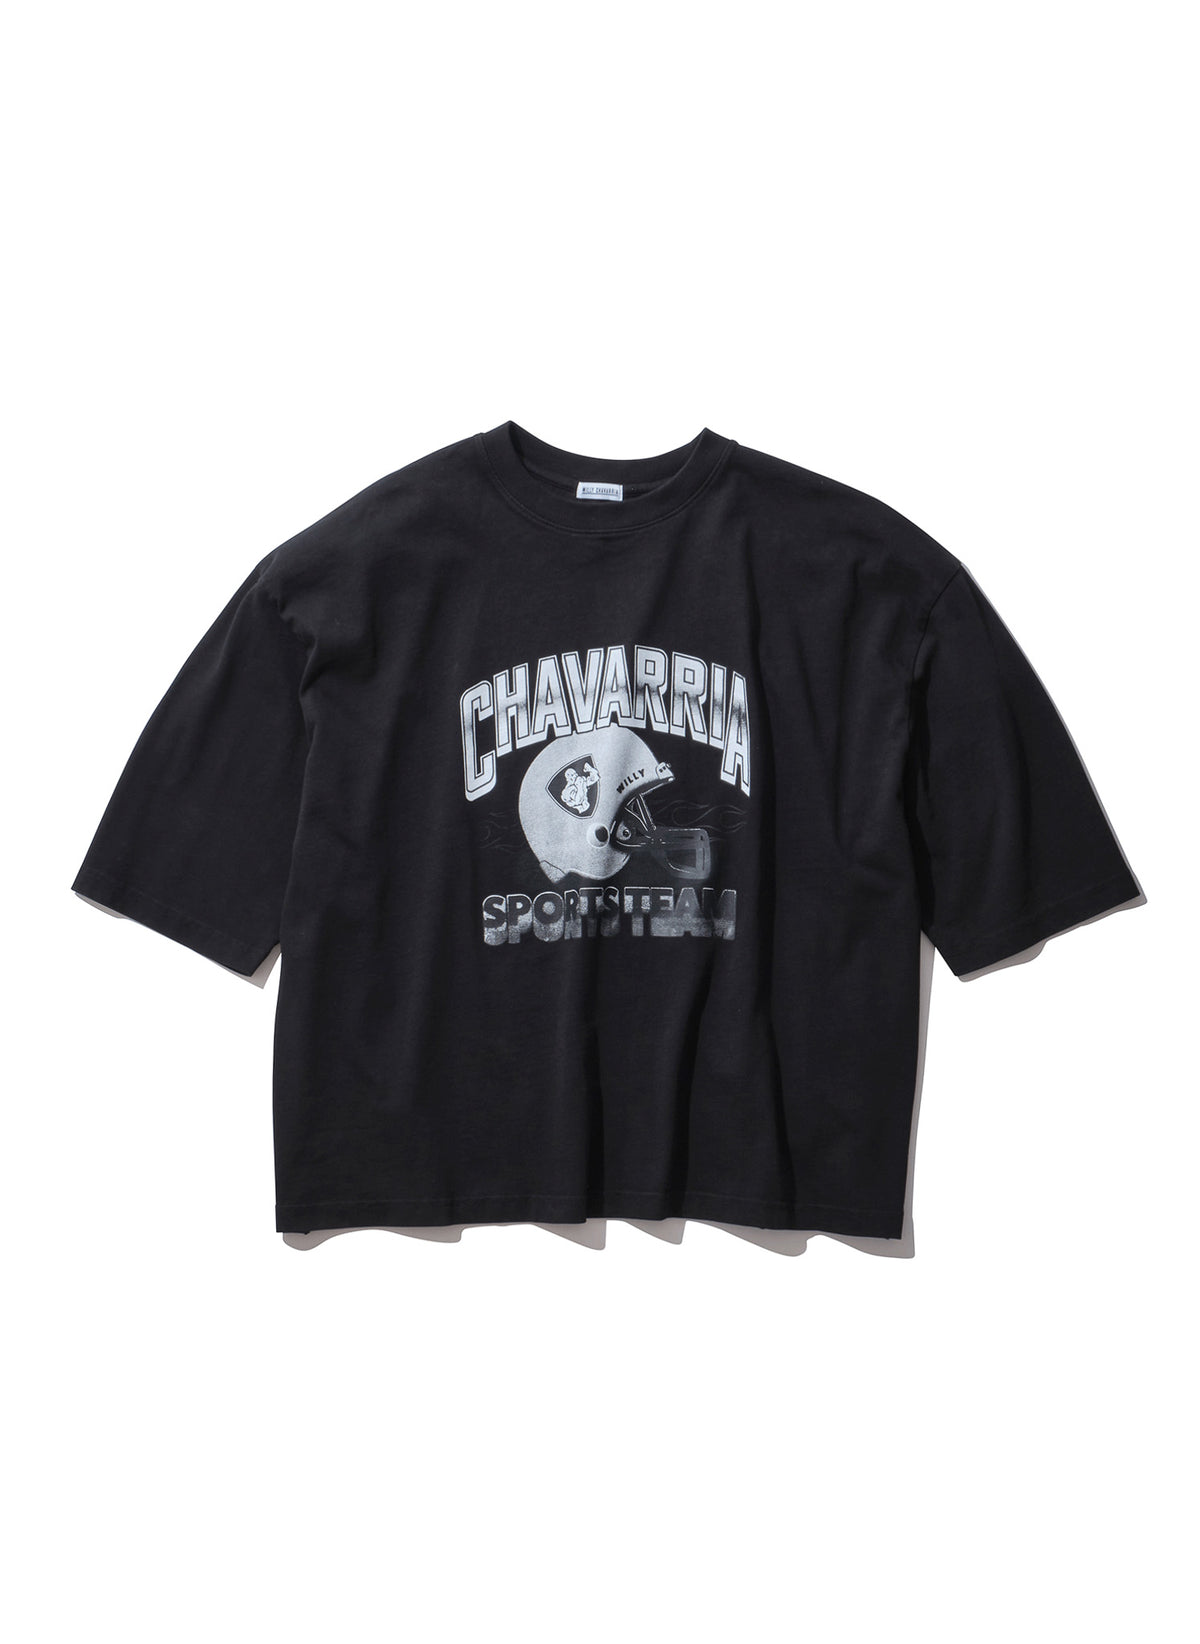 WILLY CHAVARRIA / SS BUFFALO WILLY SPORTS TEAM UPDATED WILLY BLACK